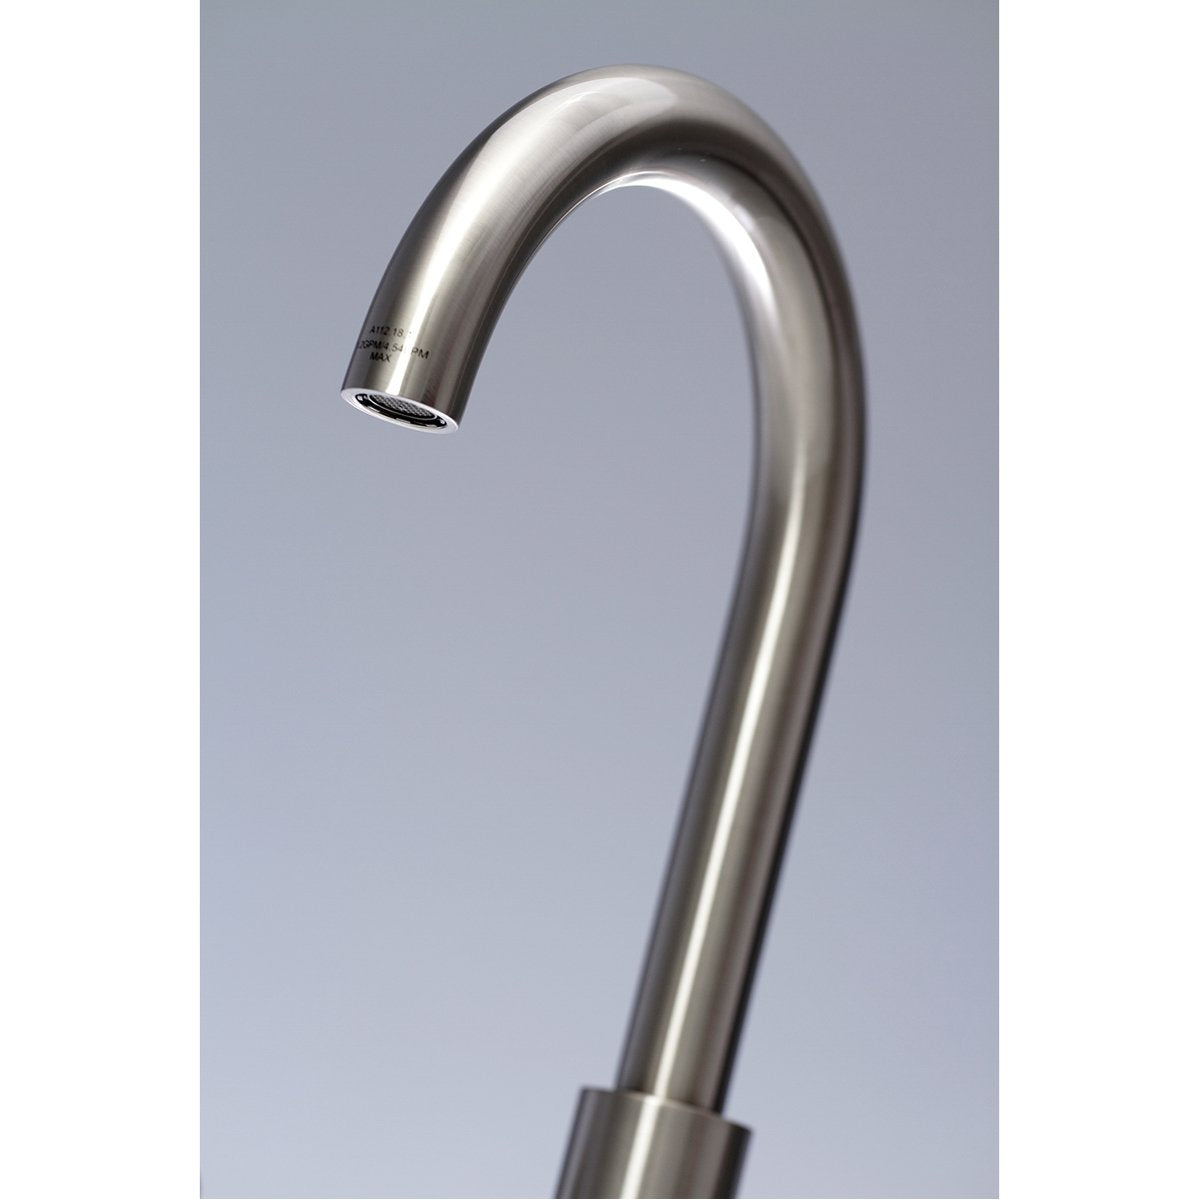 Kingston Brass Fauceture Concord Widespread Bathroom Faucet